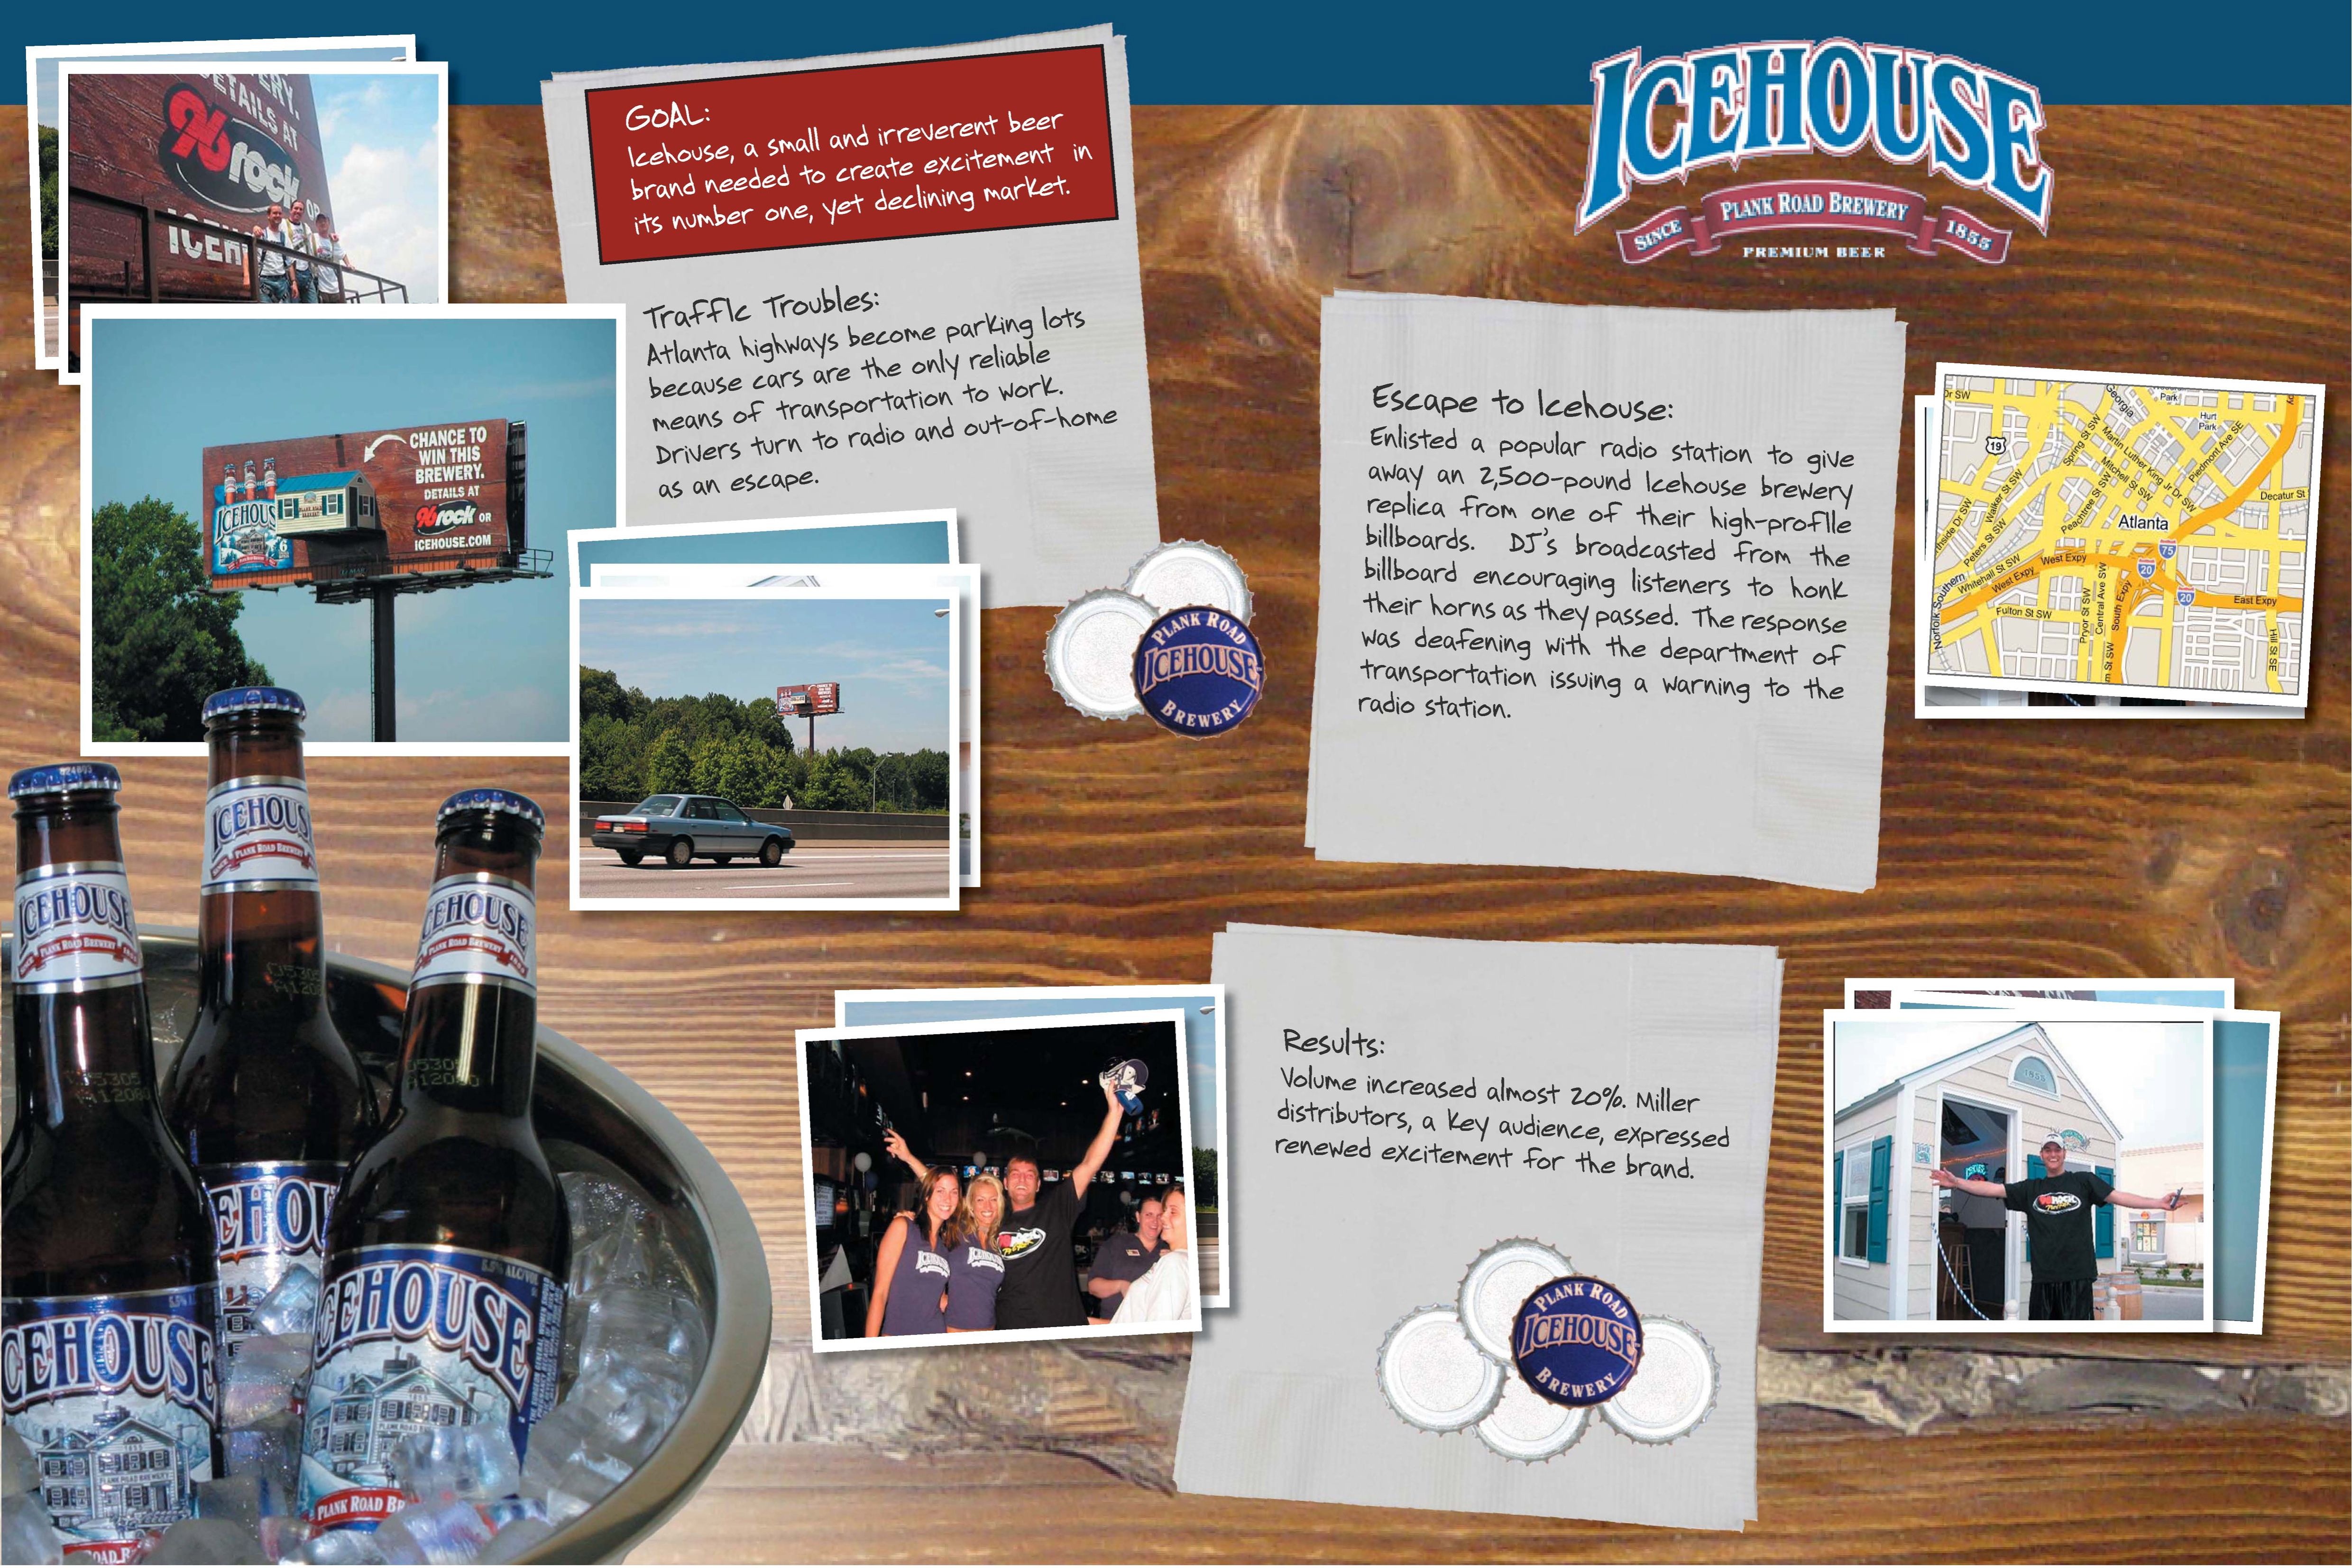 ICEHOUSE BEER